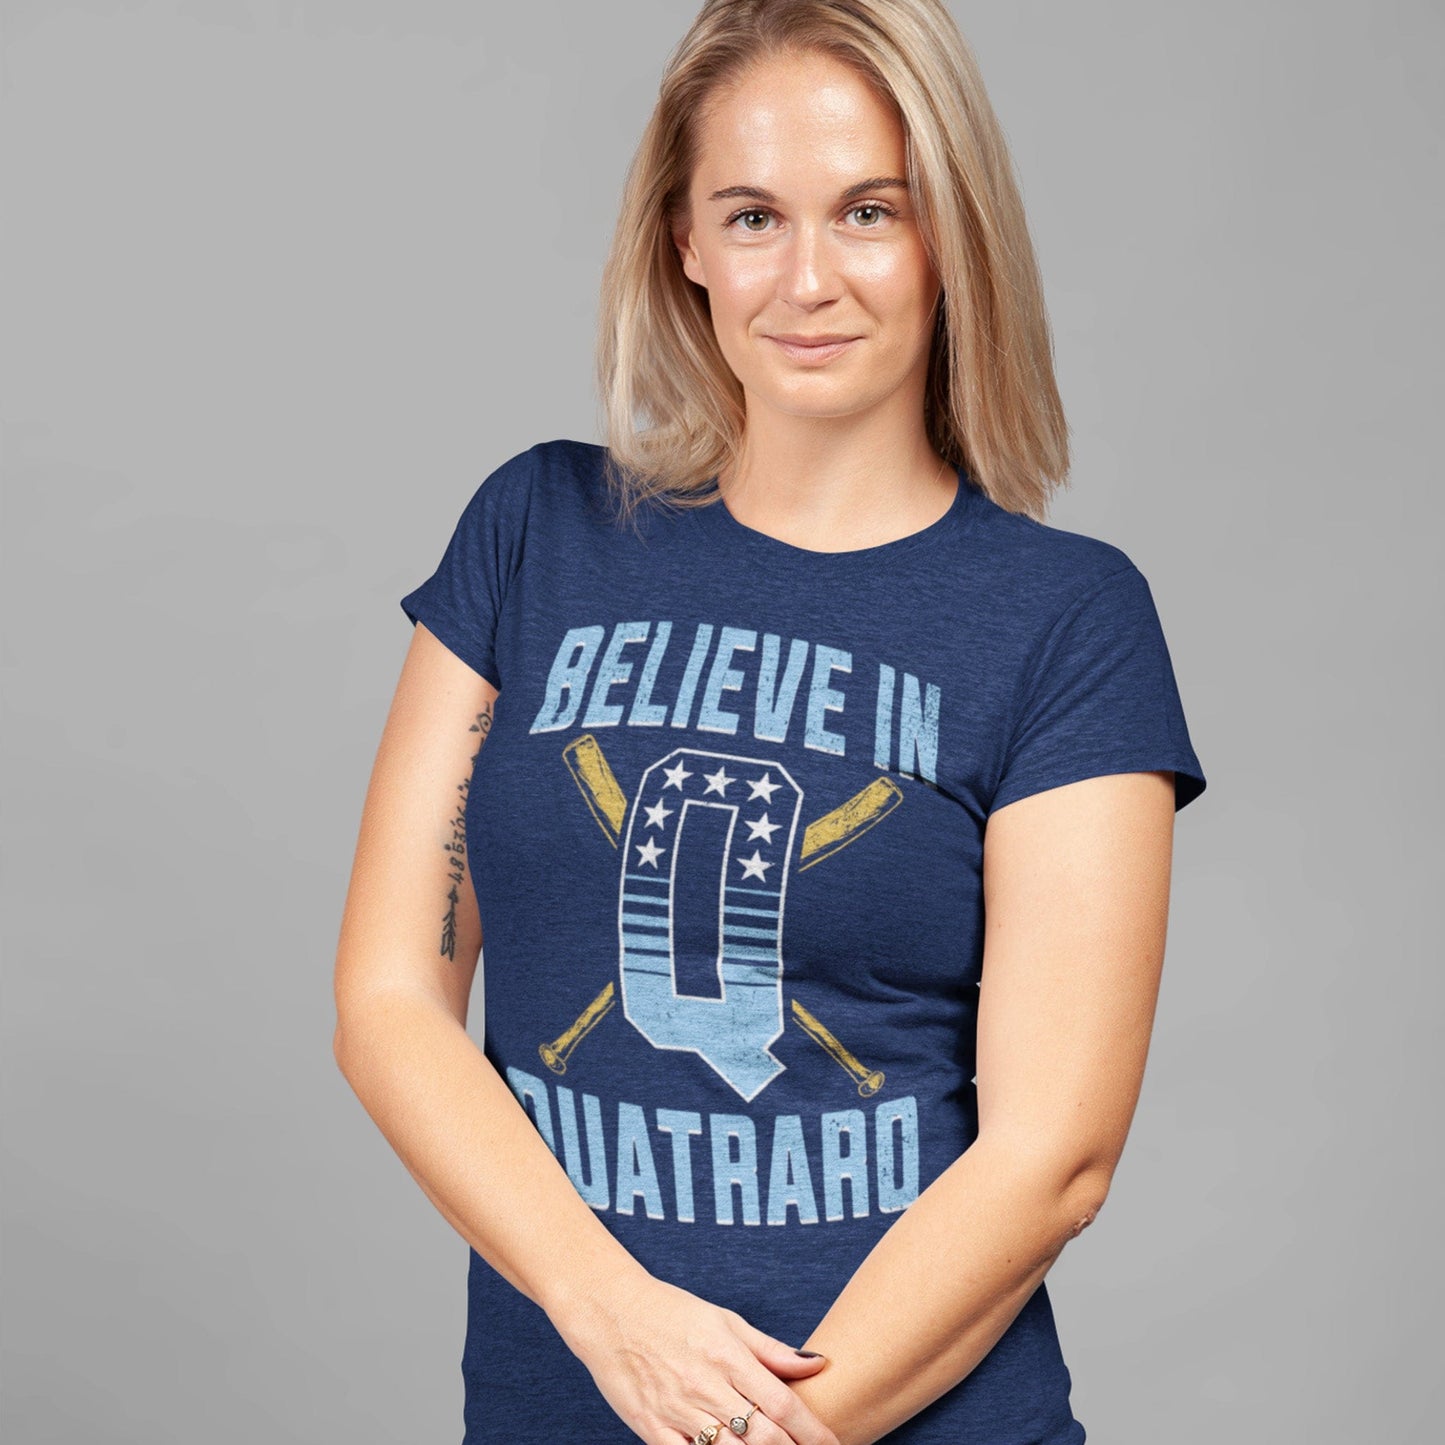 KC Swag Kansas City Royals royal blue, powder, gold, white BELIEVE IN Q on heather navy unisex t-shirt worn by female model standing in front of grey wall